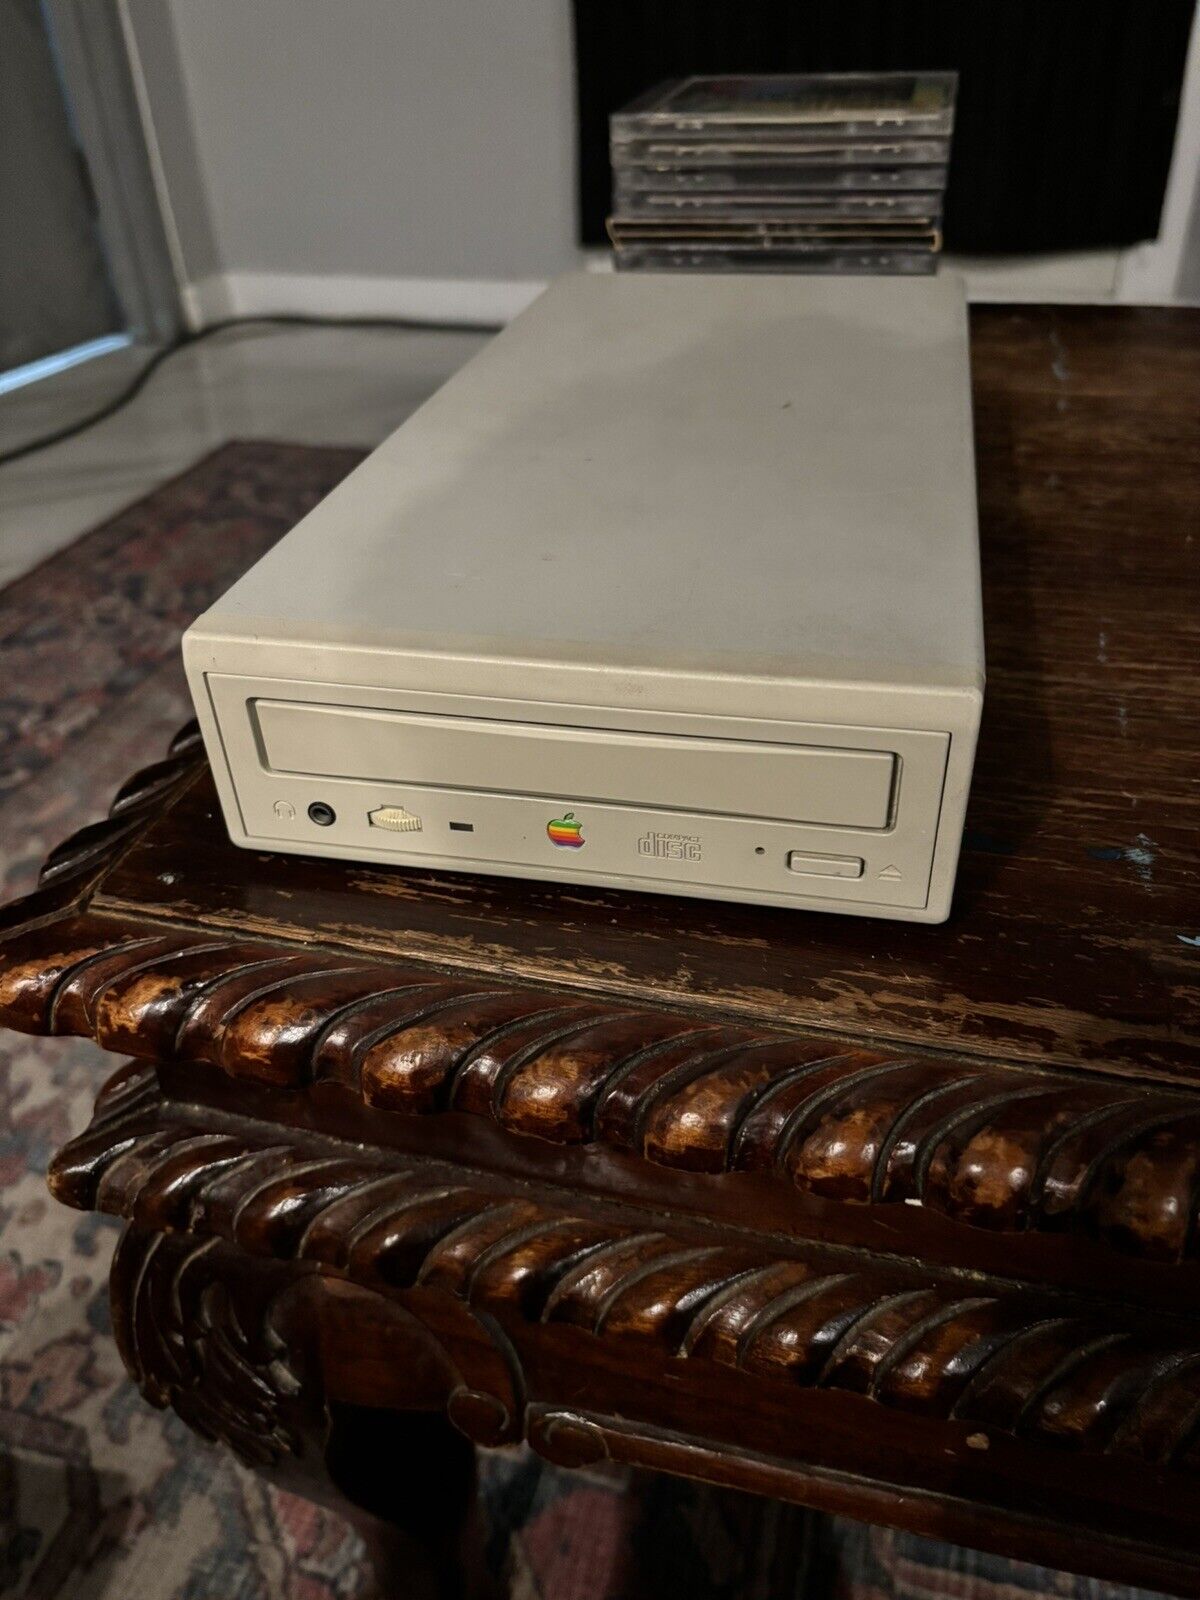 Vintage AppleCD 300e Plus SCSI CD-ROM drive Model M2918 - Tested and Working